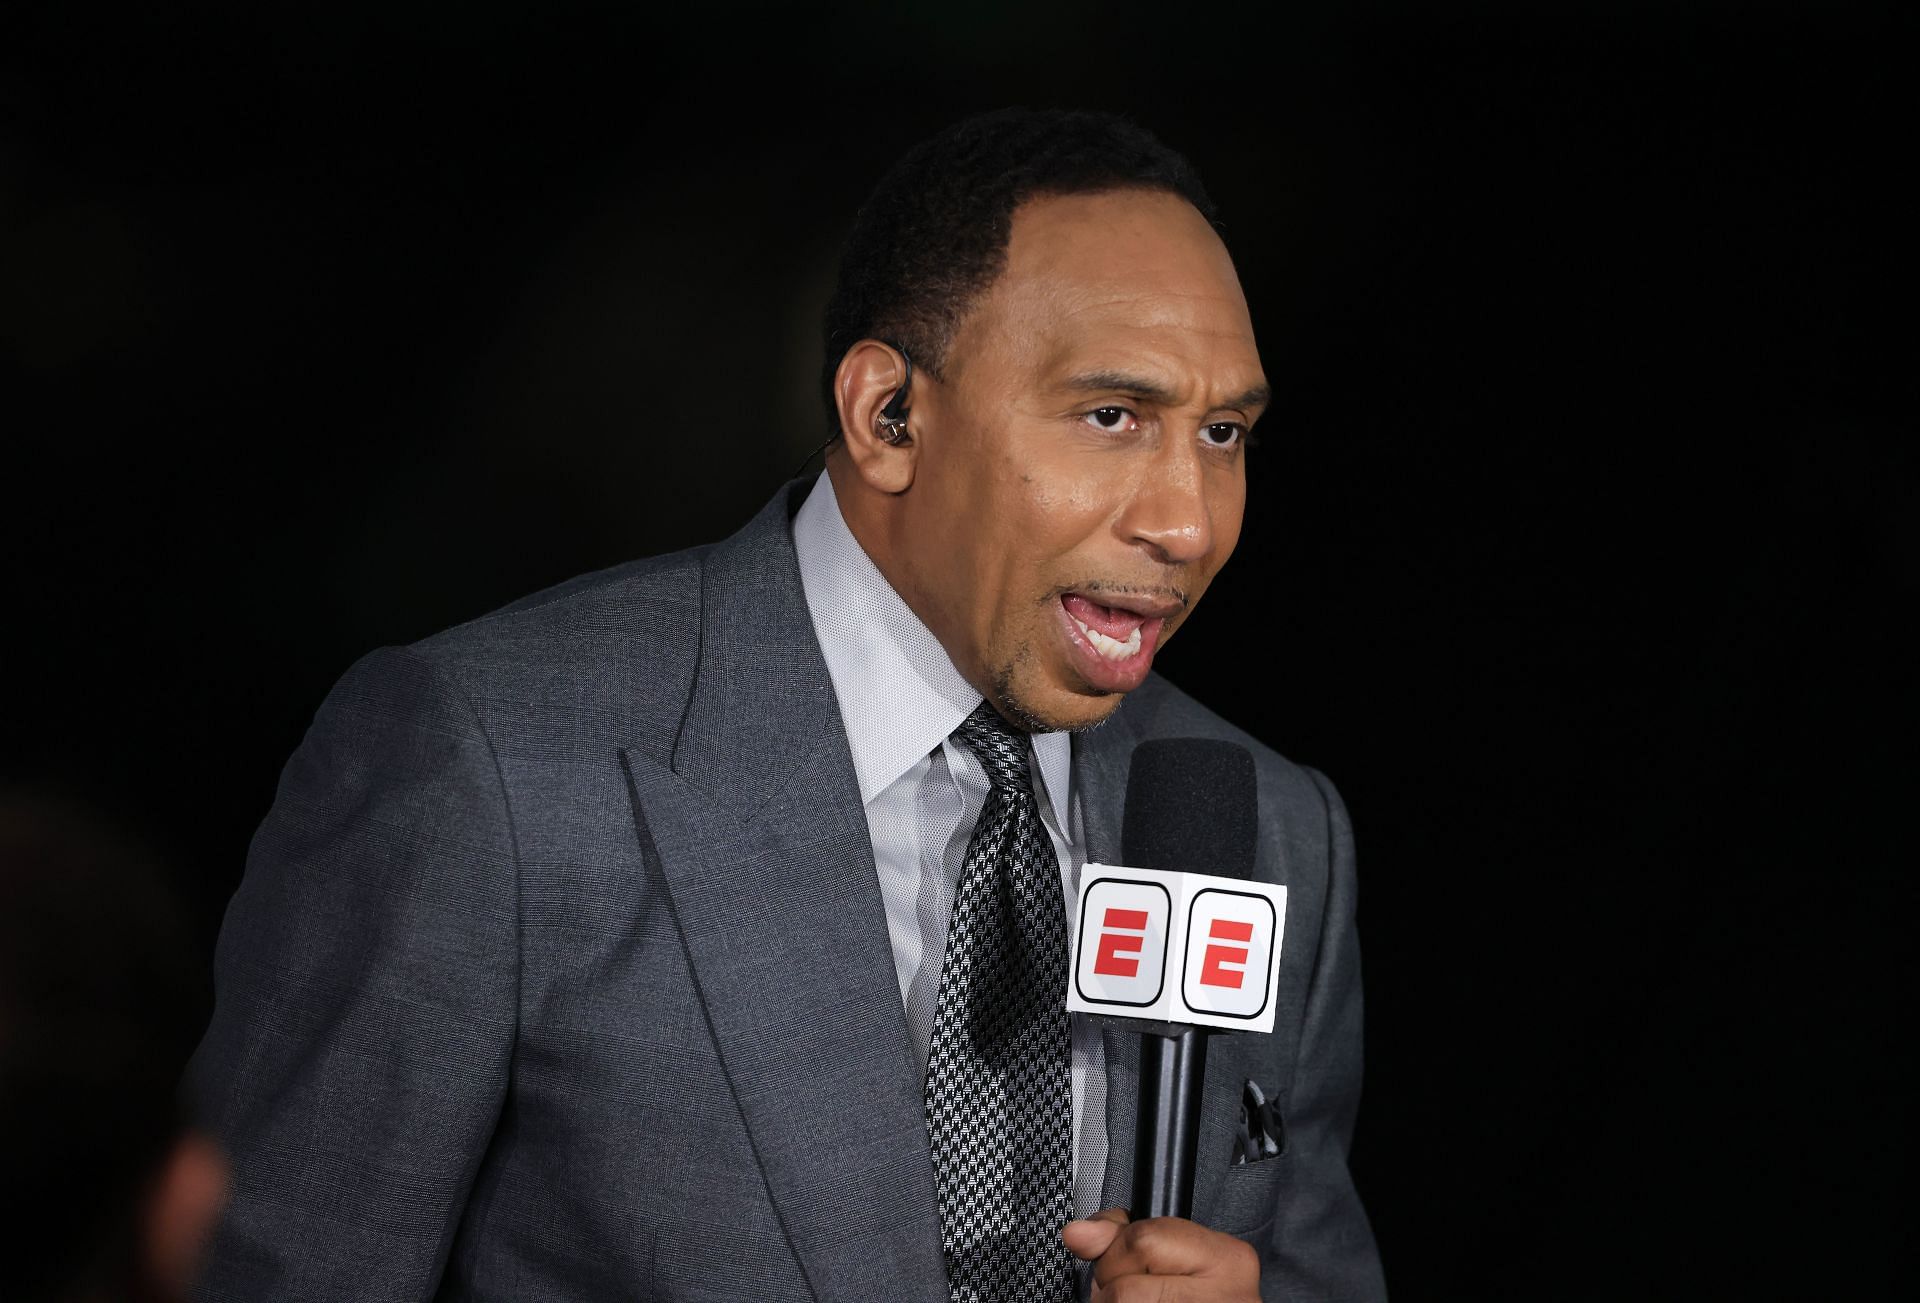 ESPN analyst Stephen A. Smith during the 2021 NBA Finals.